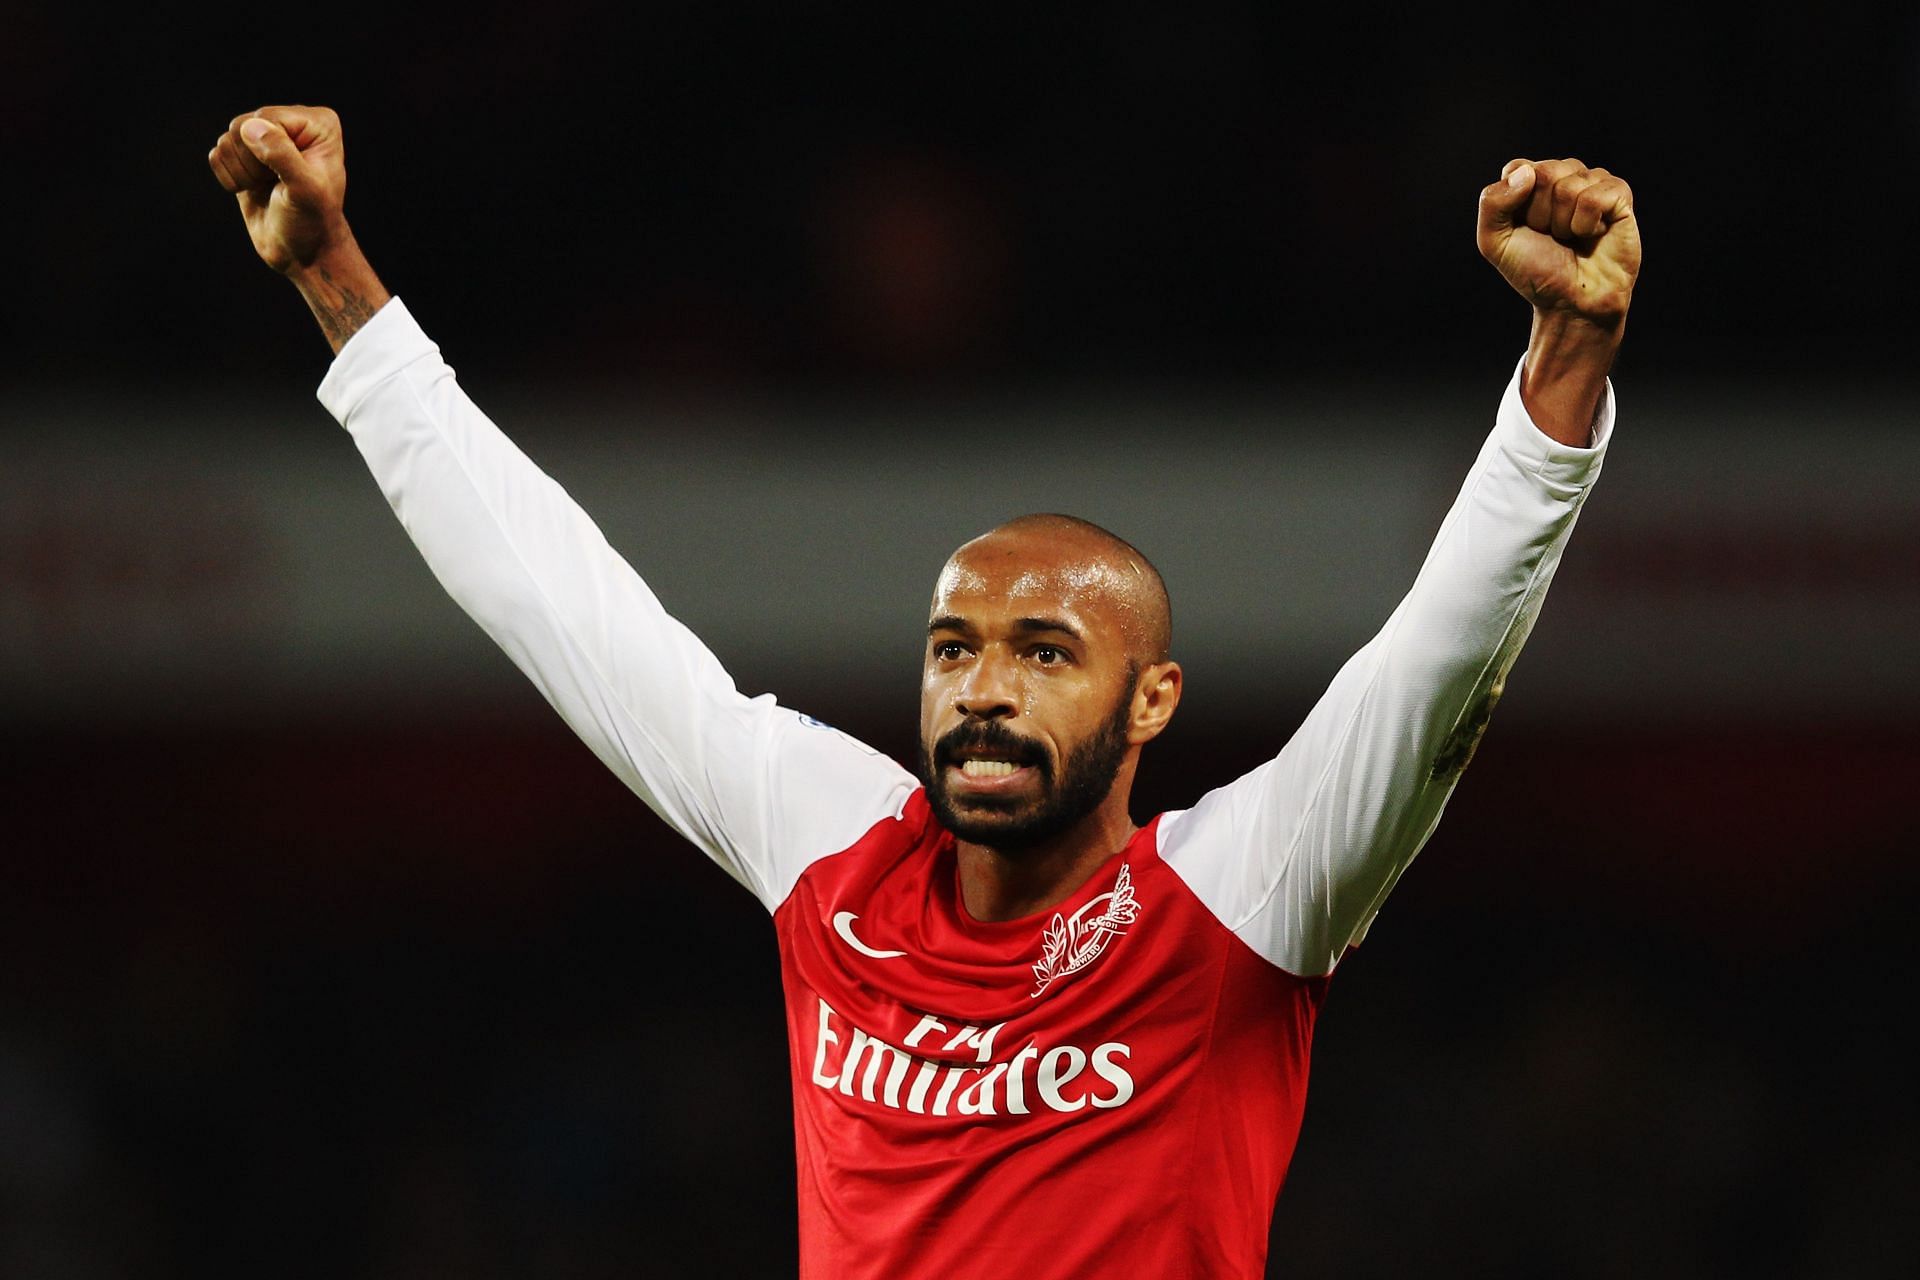 Henry is Arsenal&#039;s top goalscorer in Champions League with 35 goals